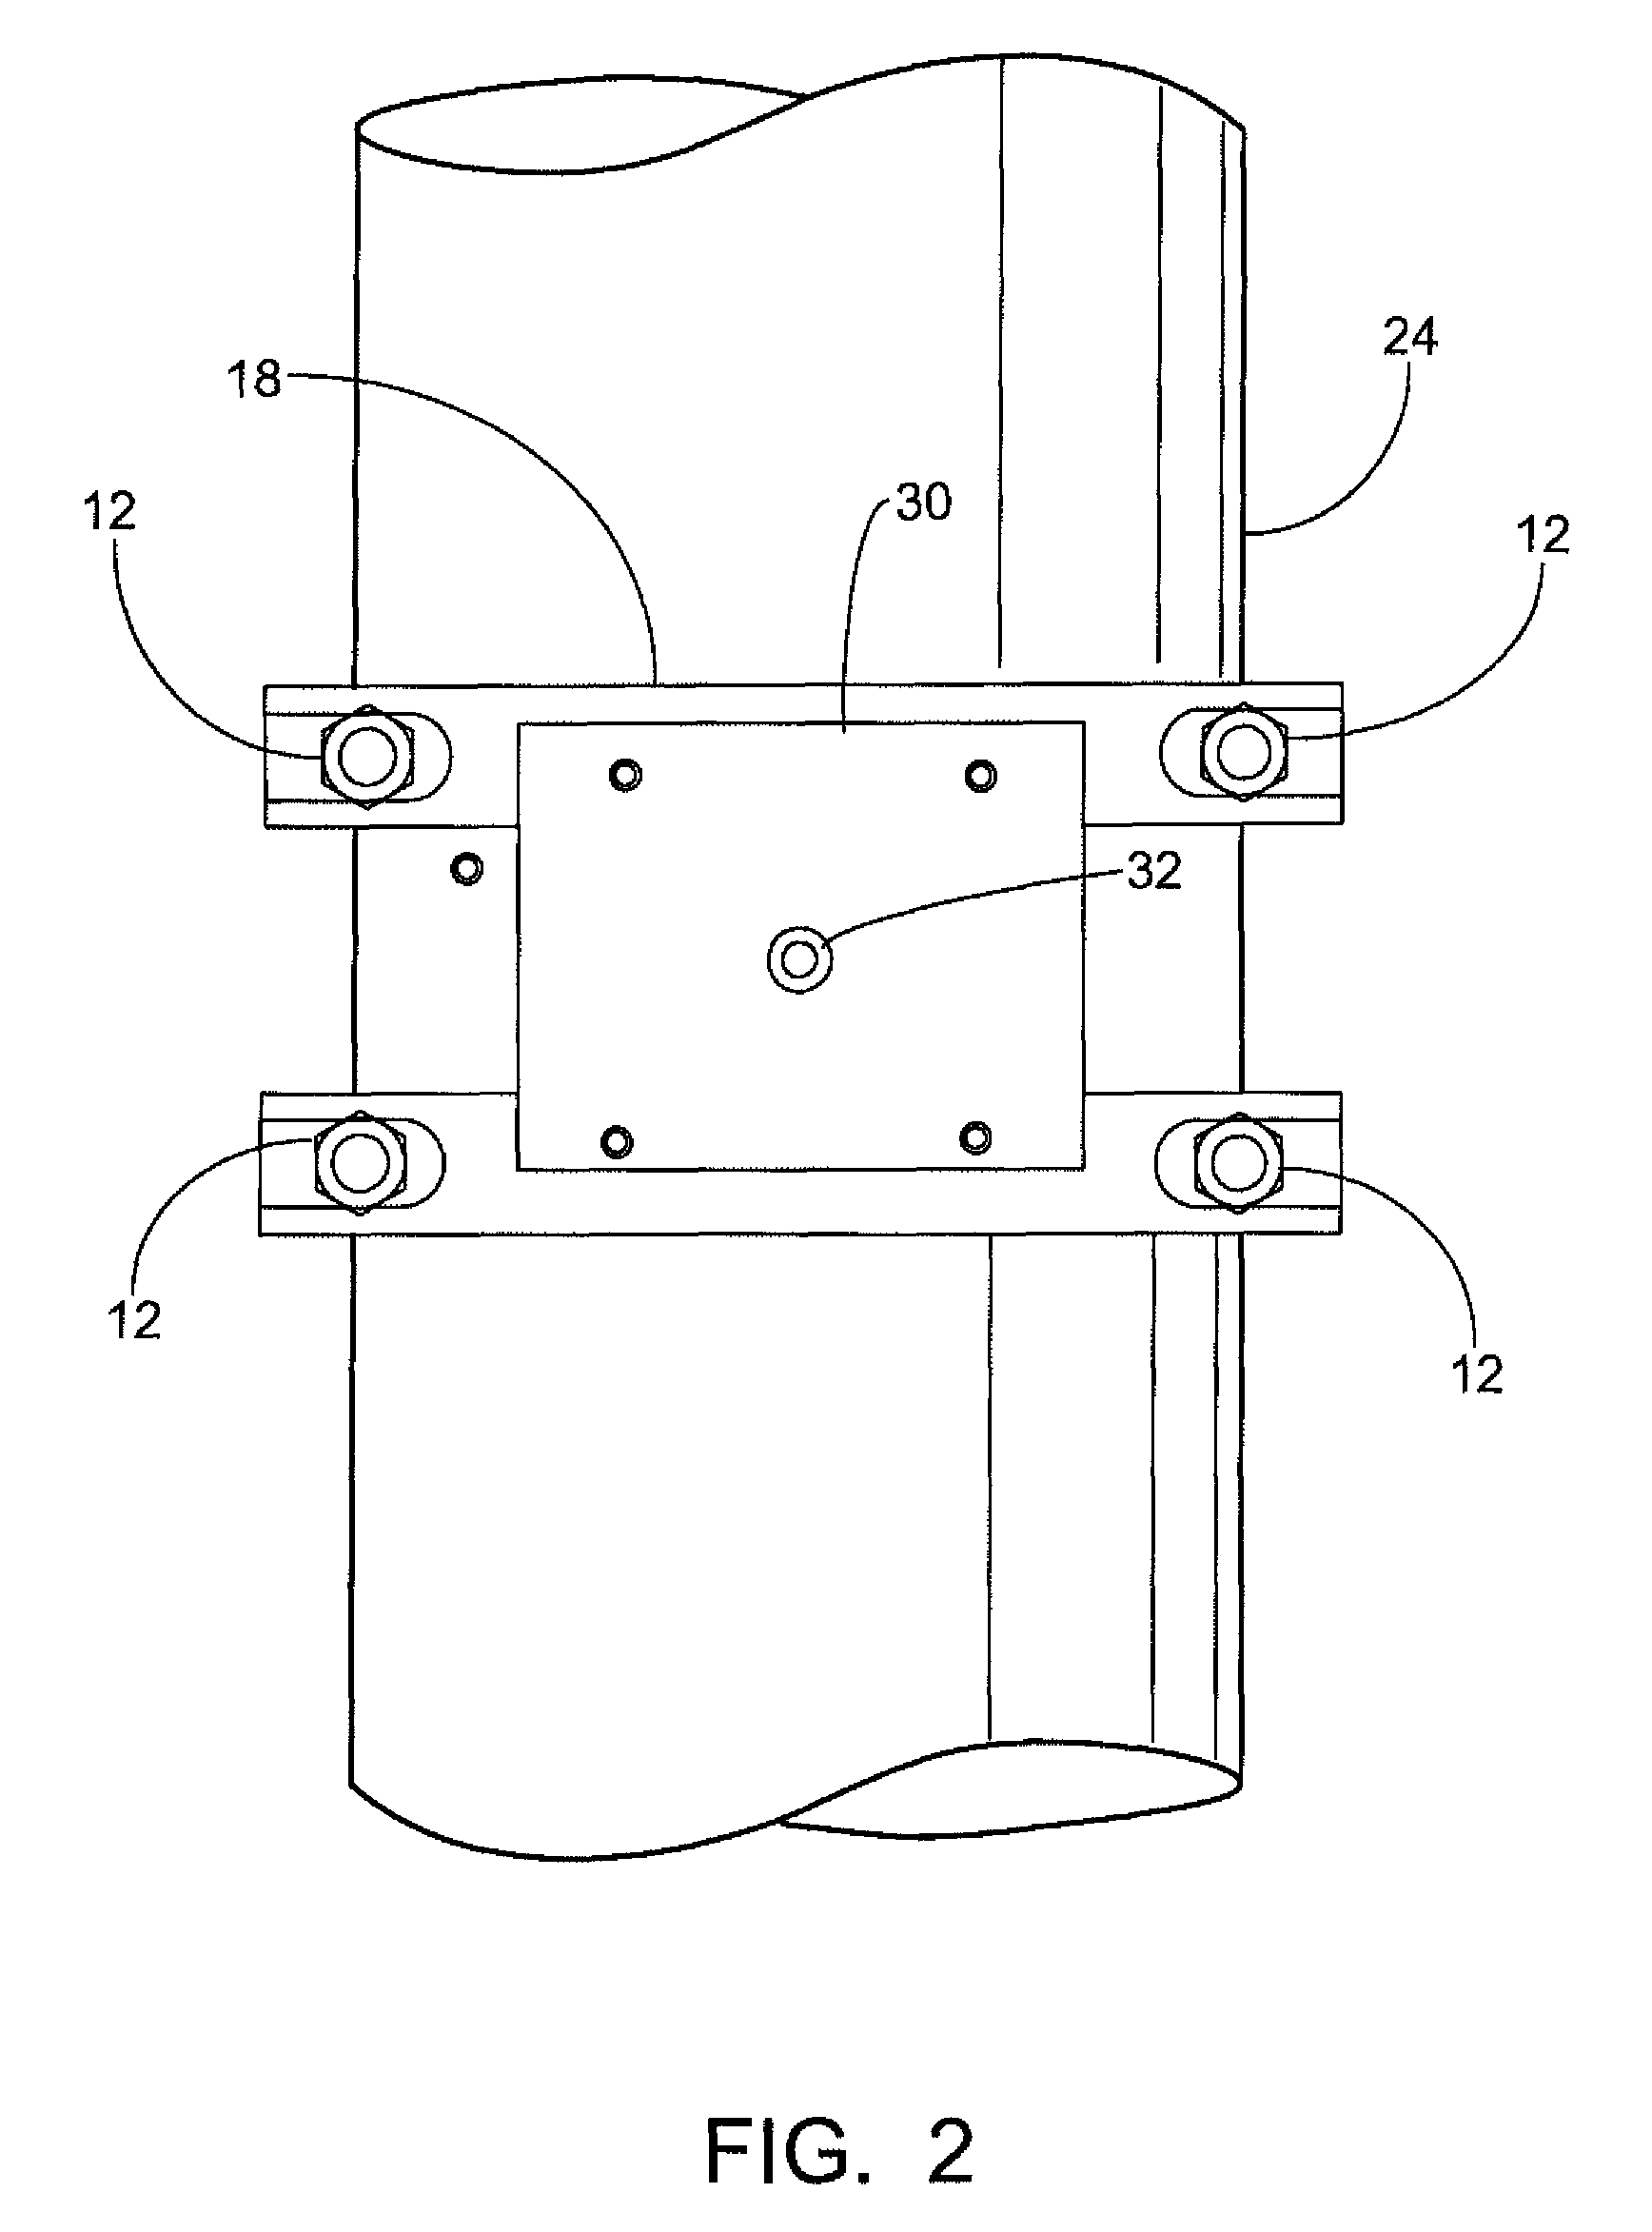 Method of direct hot tapping into a multiple production string without removing outer layers of casing